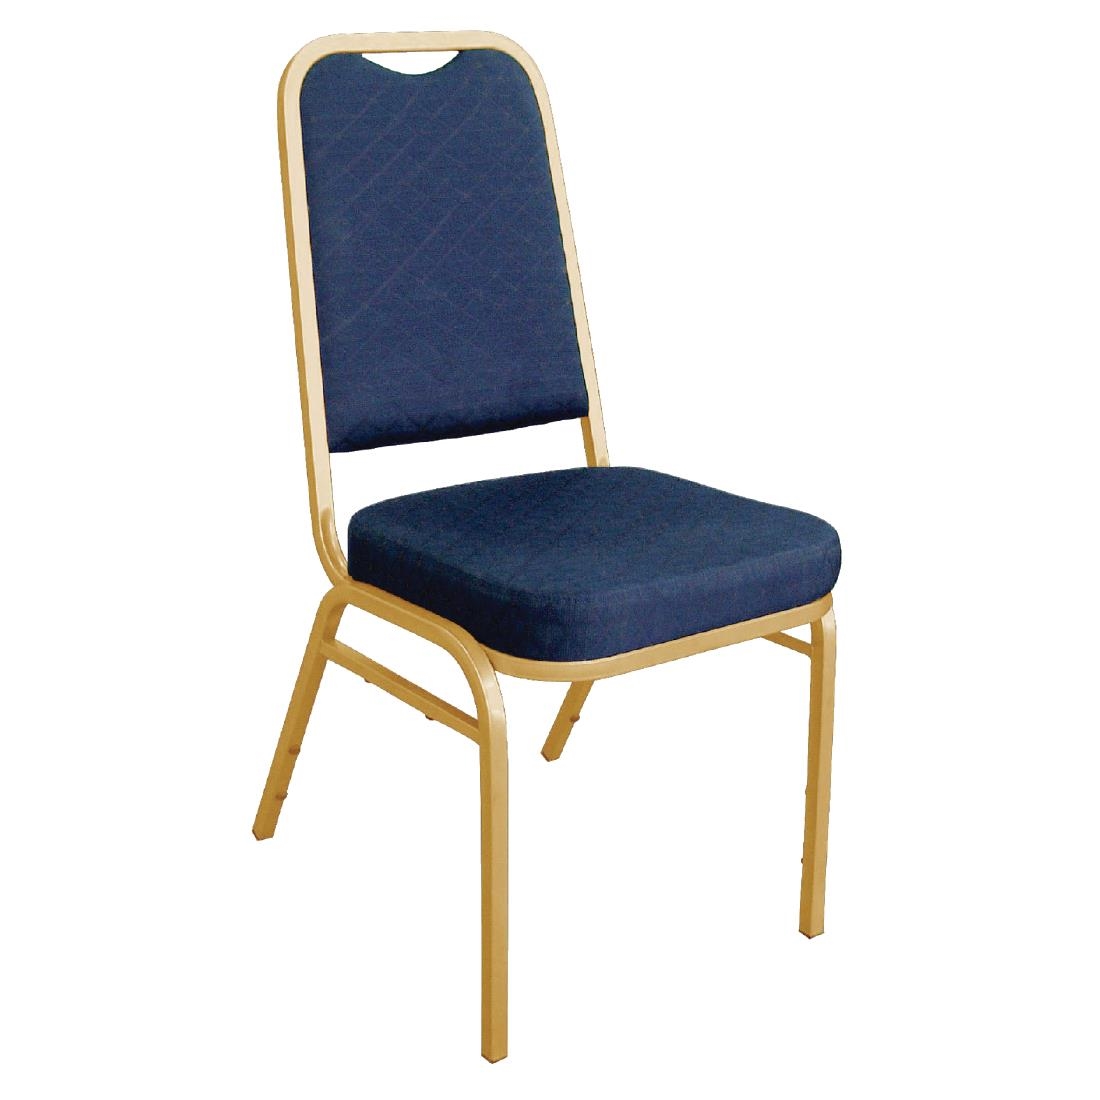 Square Banqueting Chair - Blue